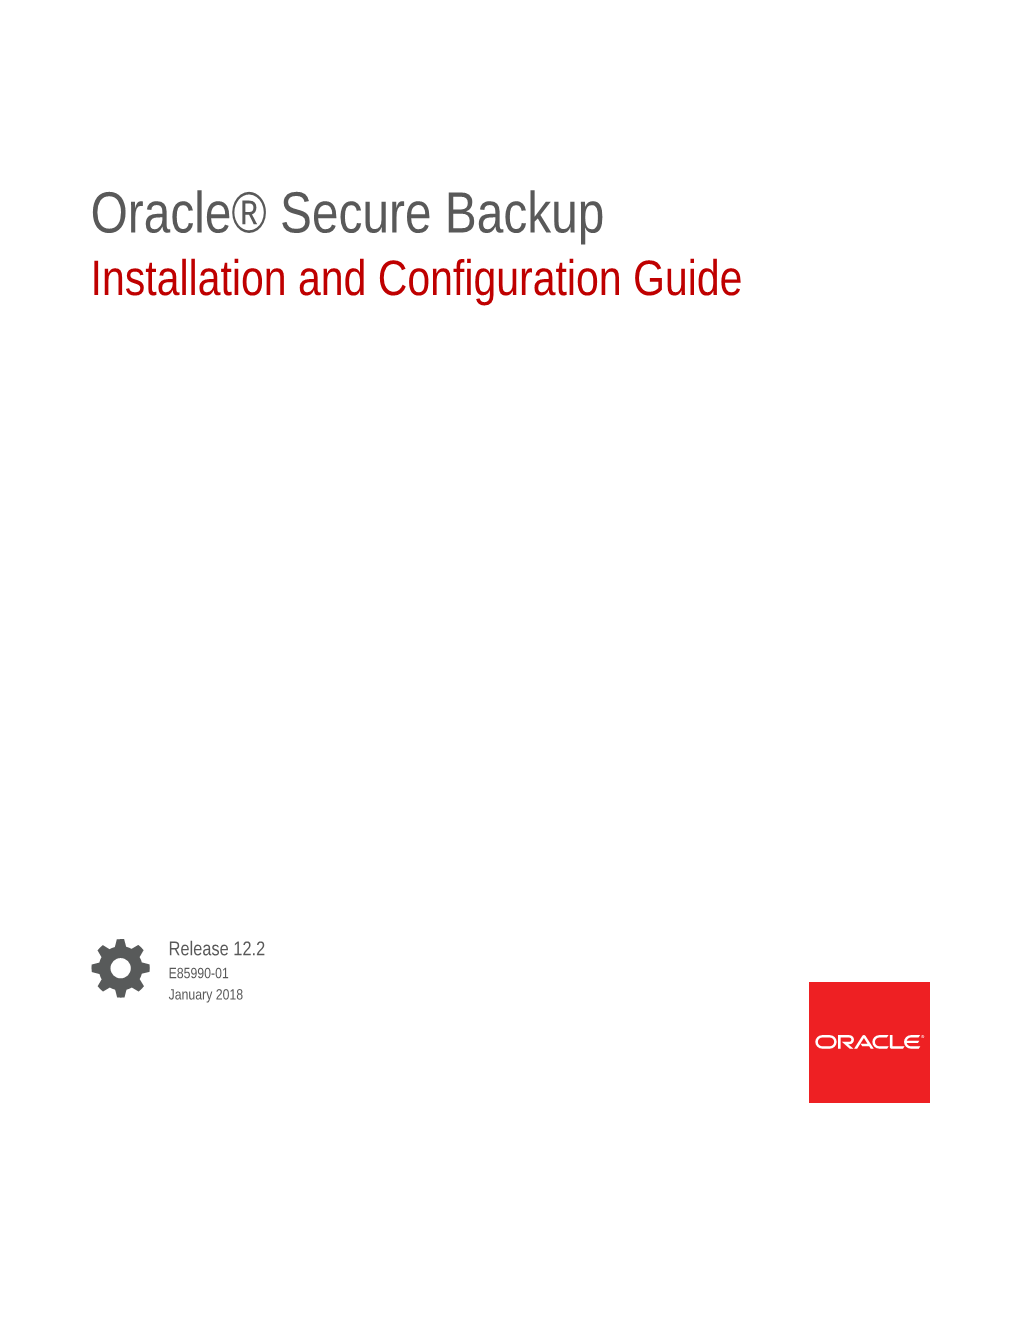 Oracle® Secure Backup Installation and Configuration Guide